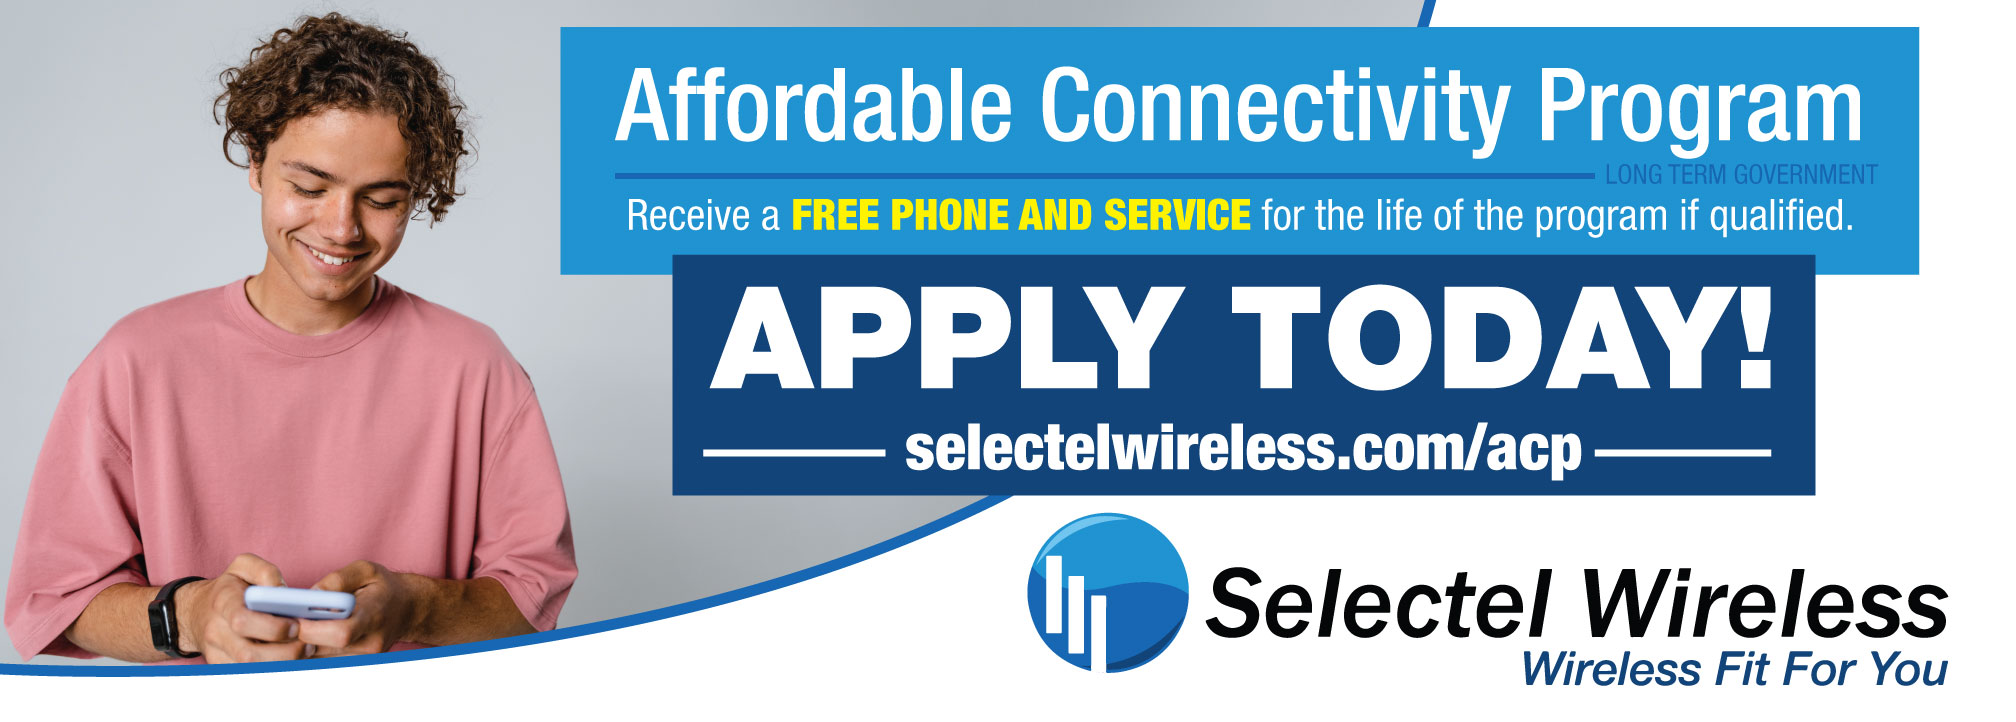 How to Apply for Selectel's ACP 